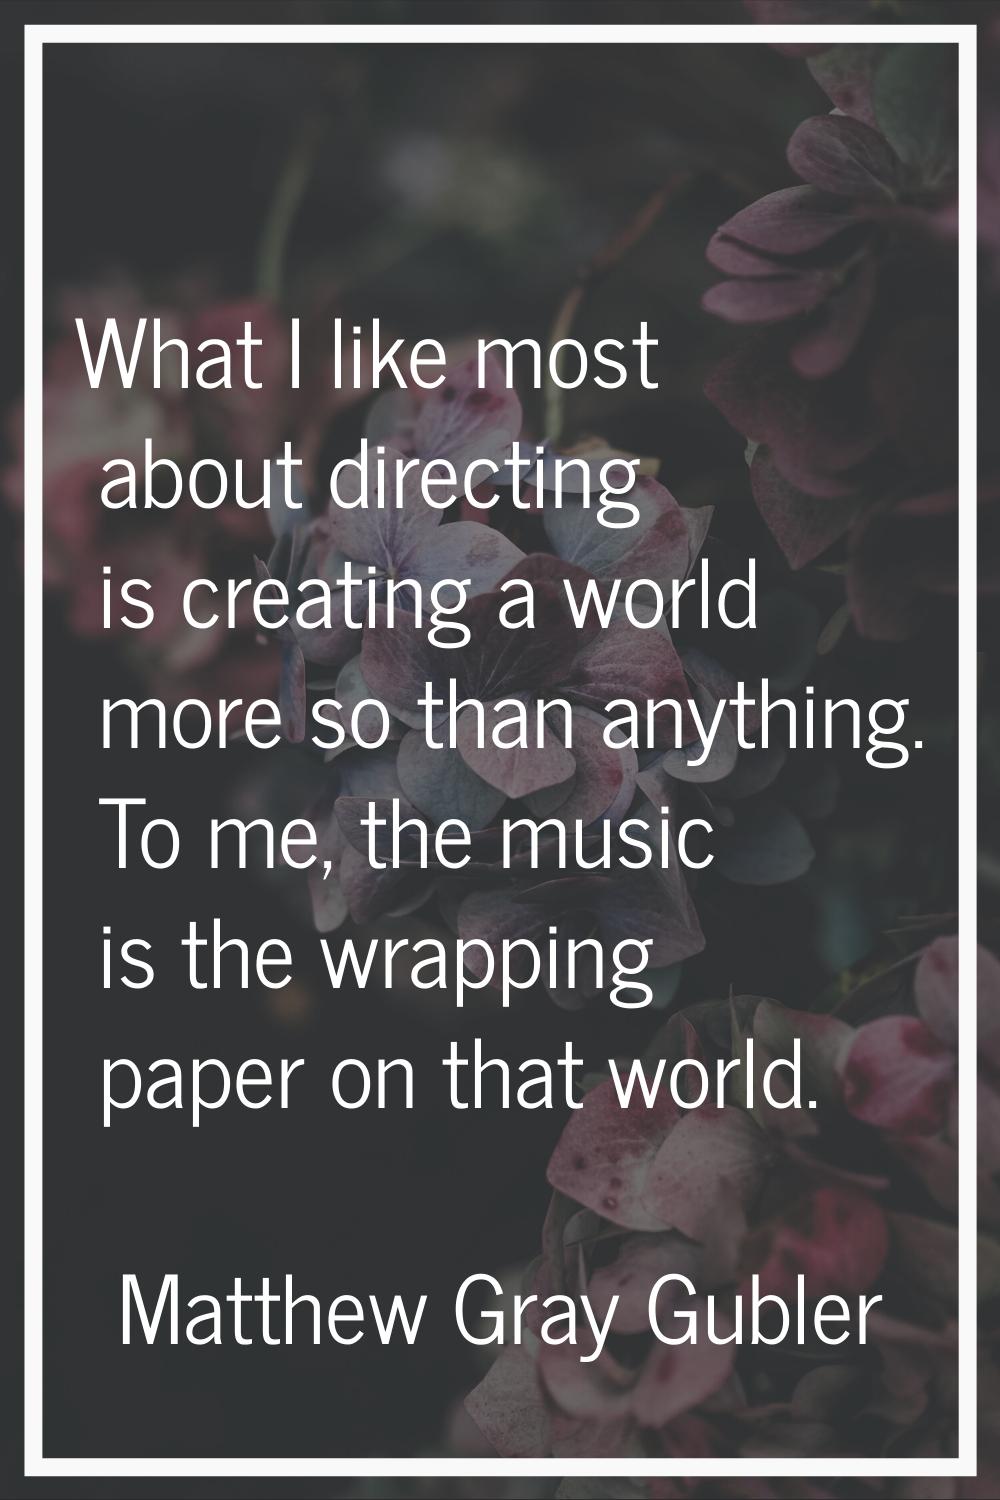 What I like most about directing is creating a world more so than anything. To me, the music is the